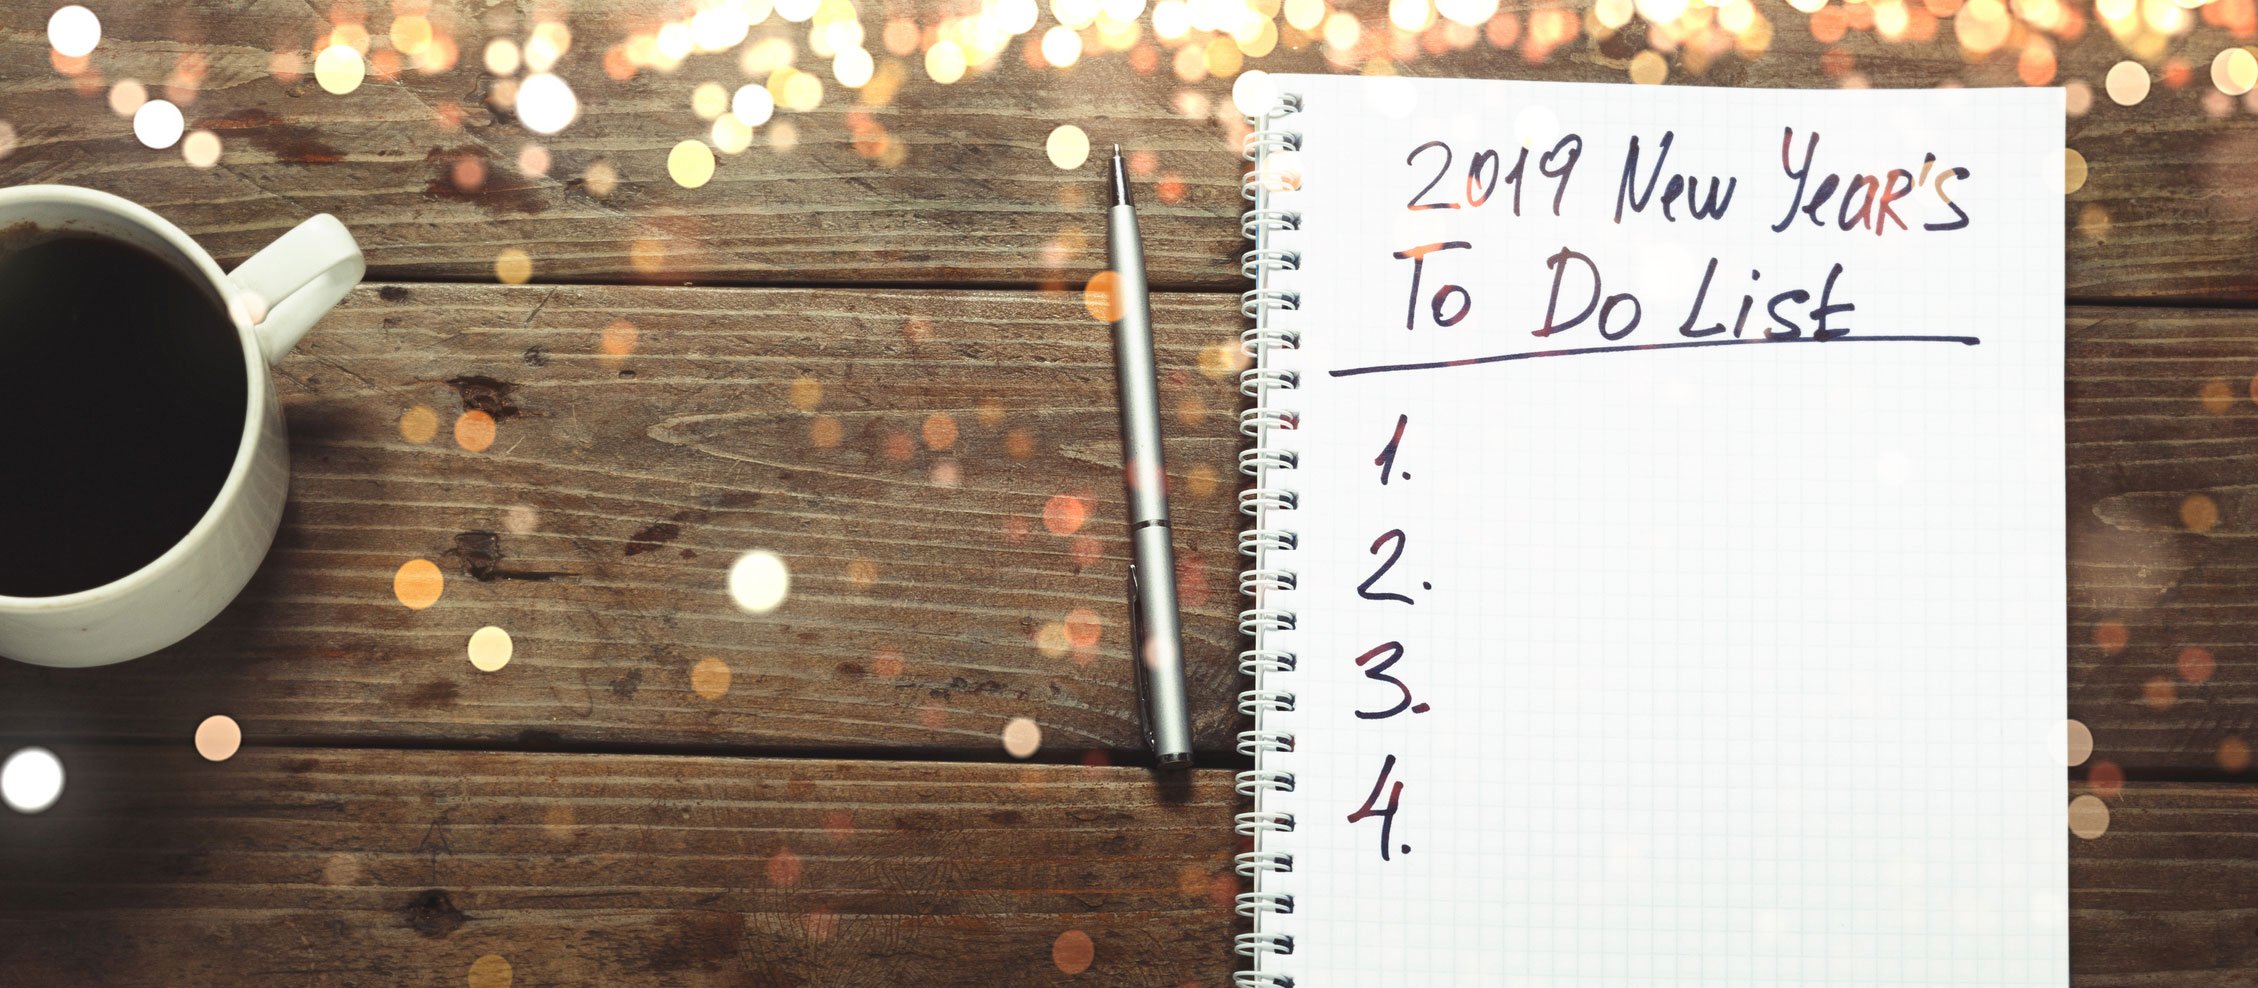 4 Things You Can Do Easily To Keep Your Resolutions